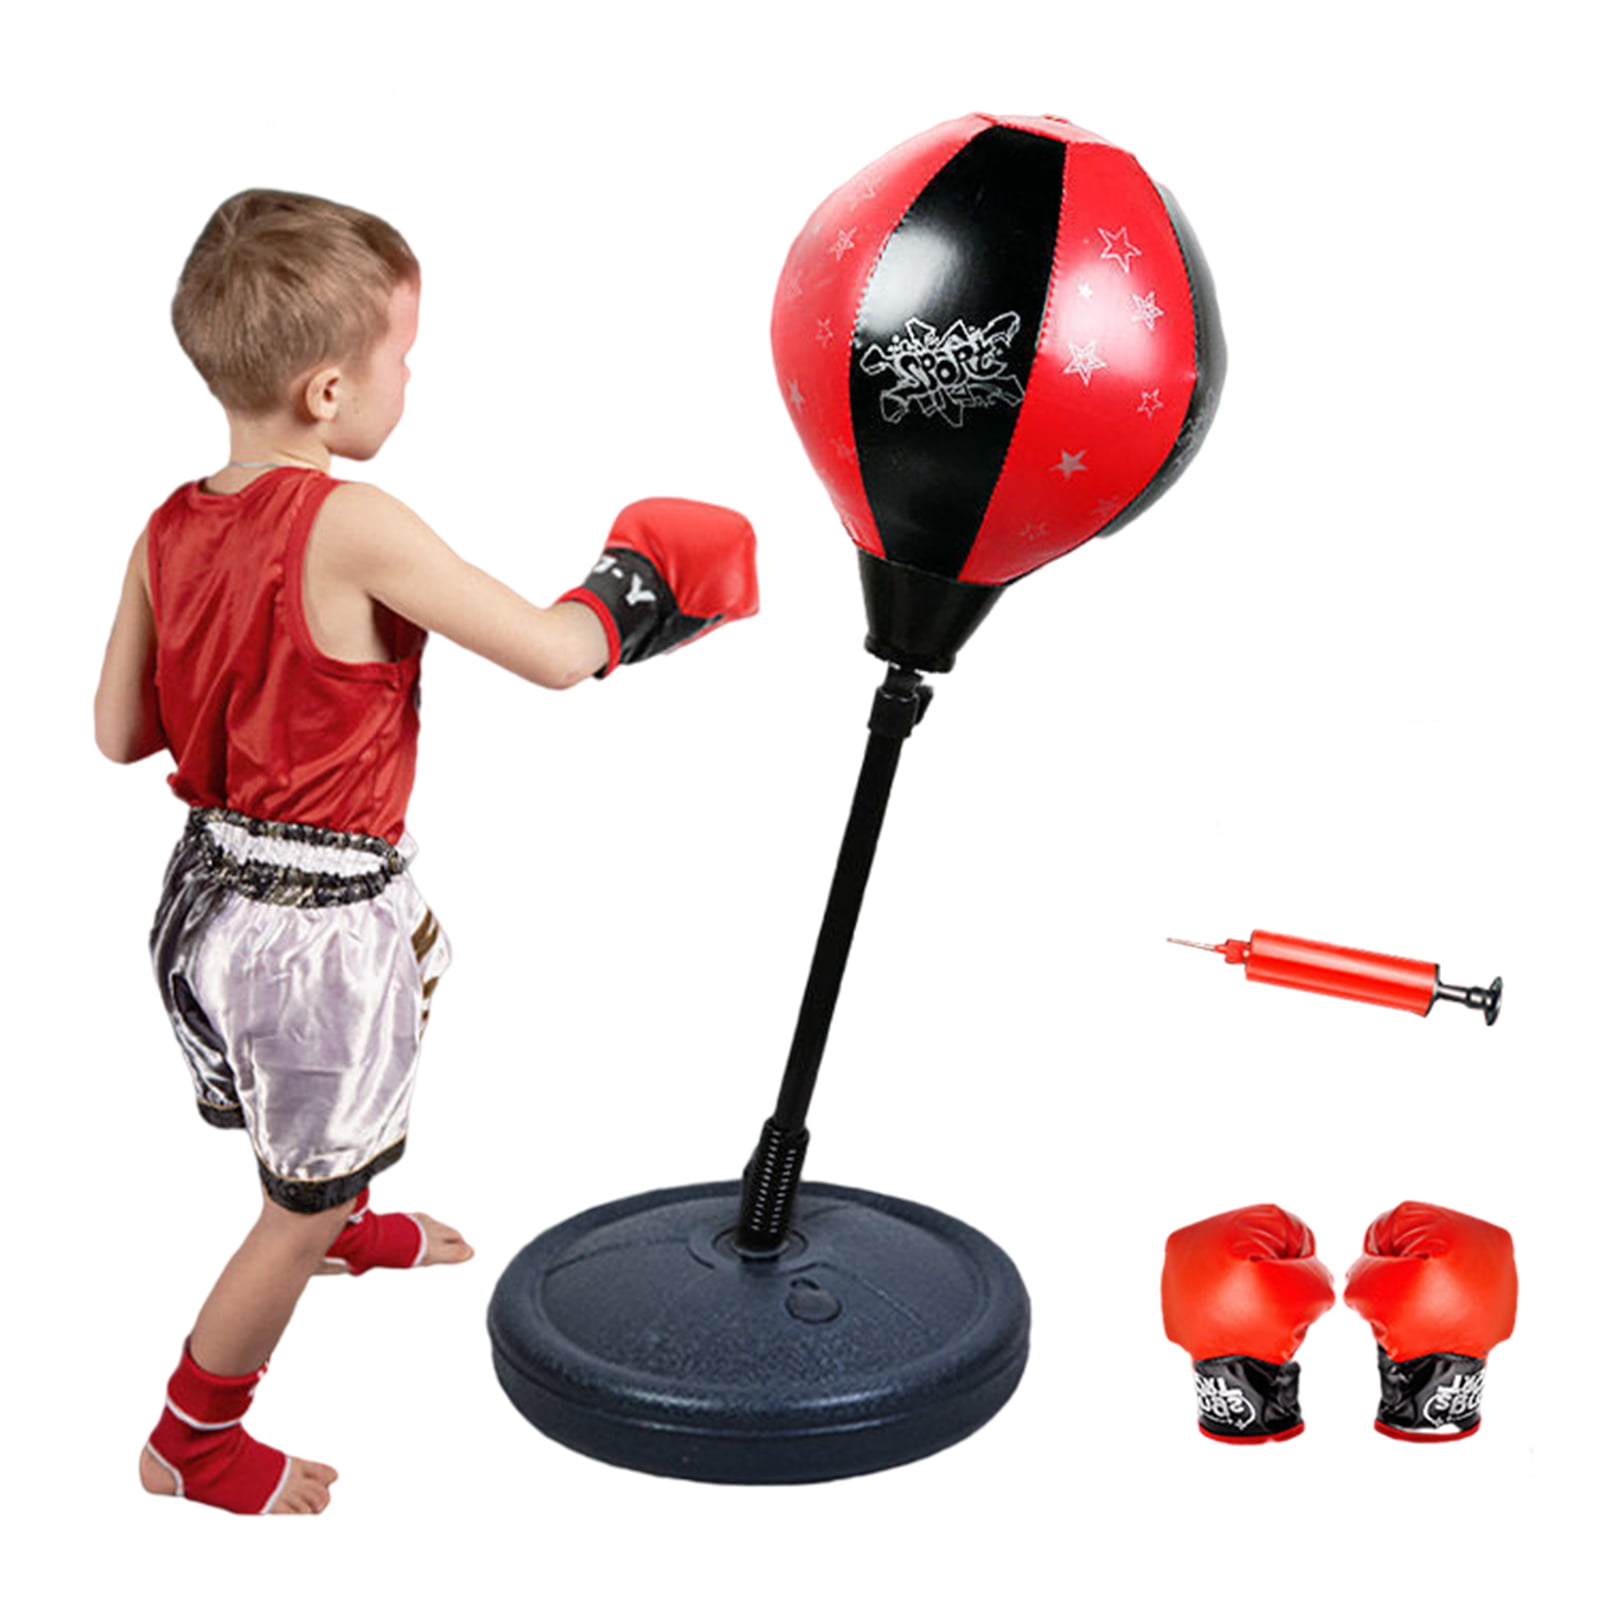 Hanging Sandbag with Child Boxing Gloves Punch Training Gloves Fight Mitts Toy Set for Kid Sports Fitness Kids Boxing Punching Bag 